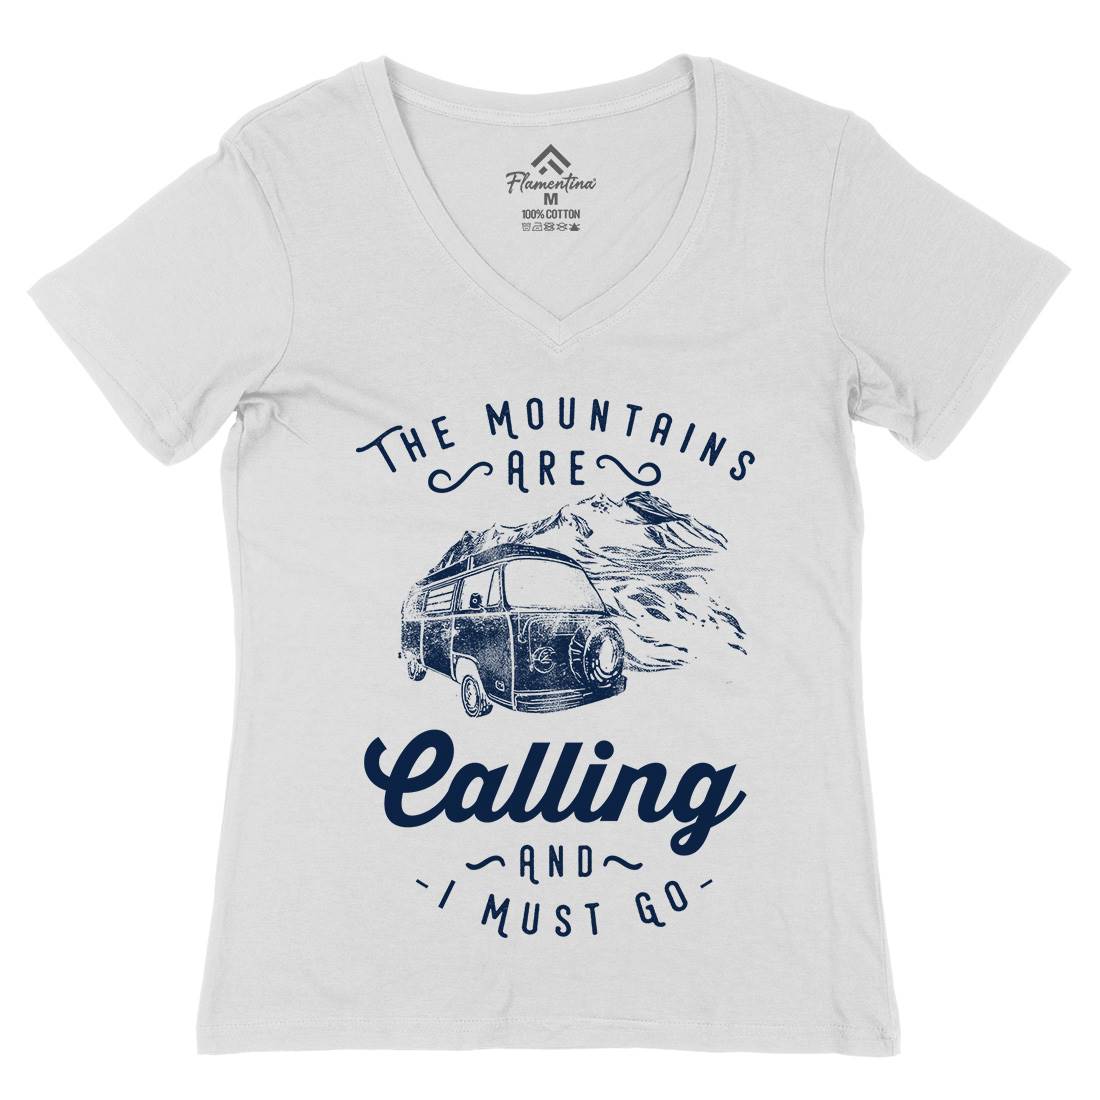 The Mountains Are Calling Womens Organic V-Neck T-Shirt Nature C988